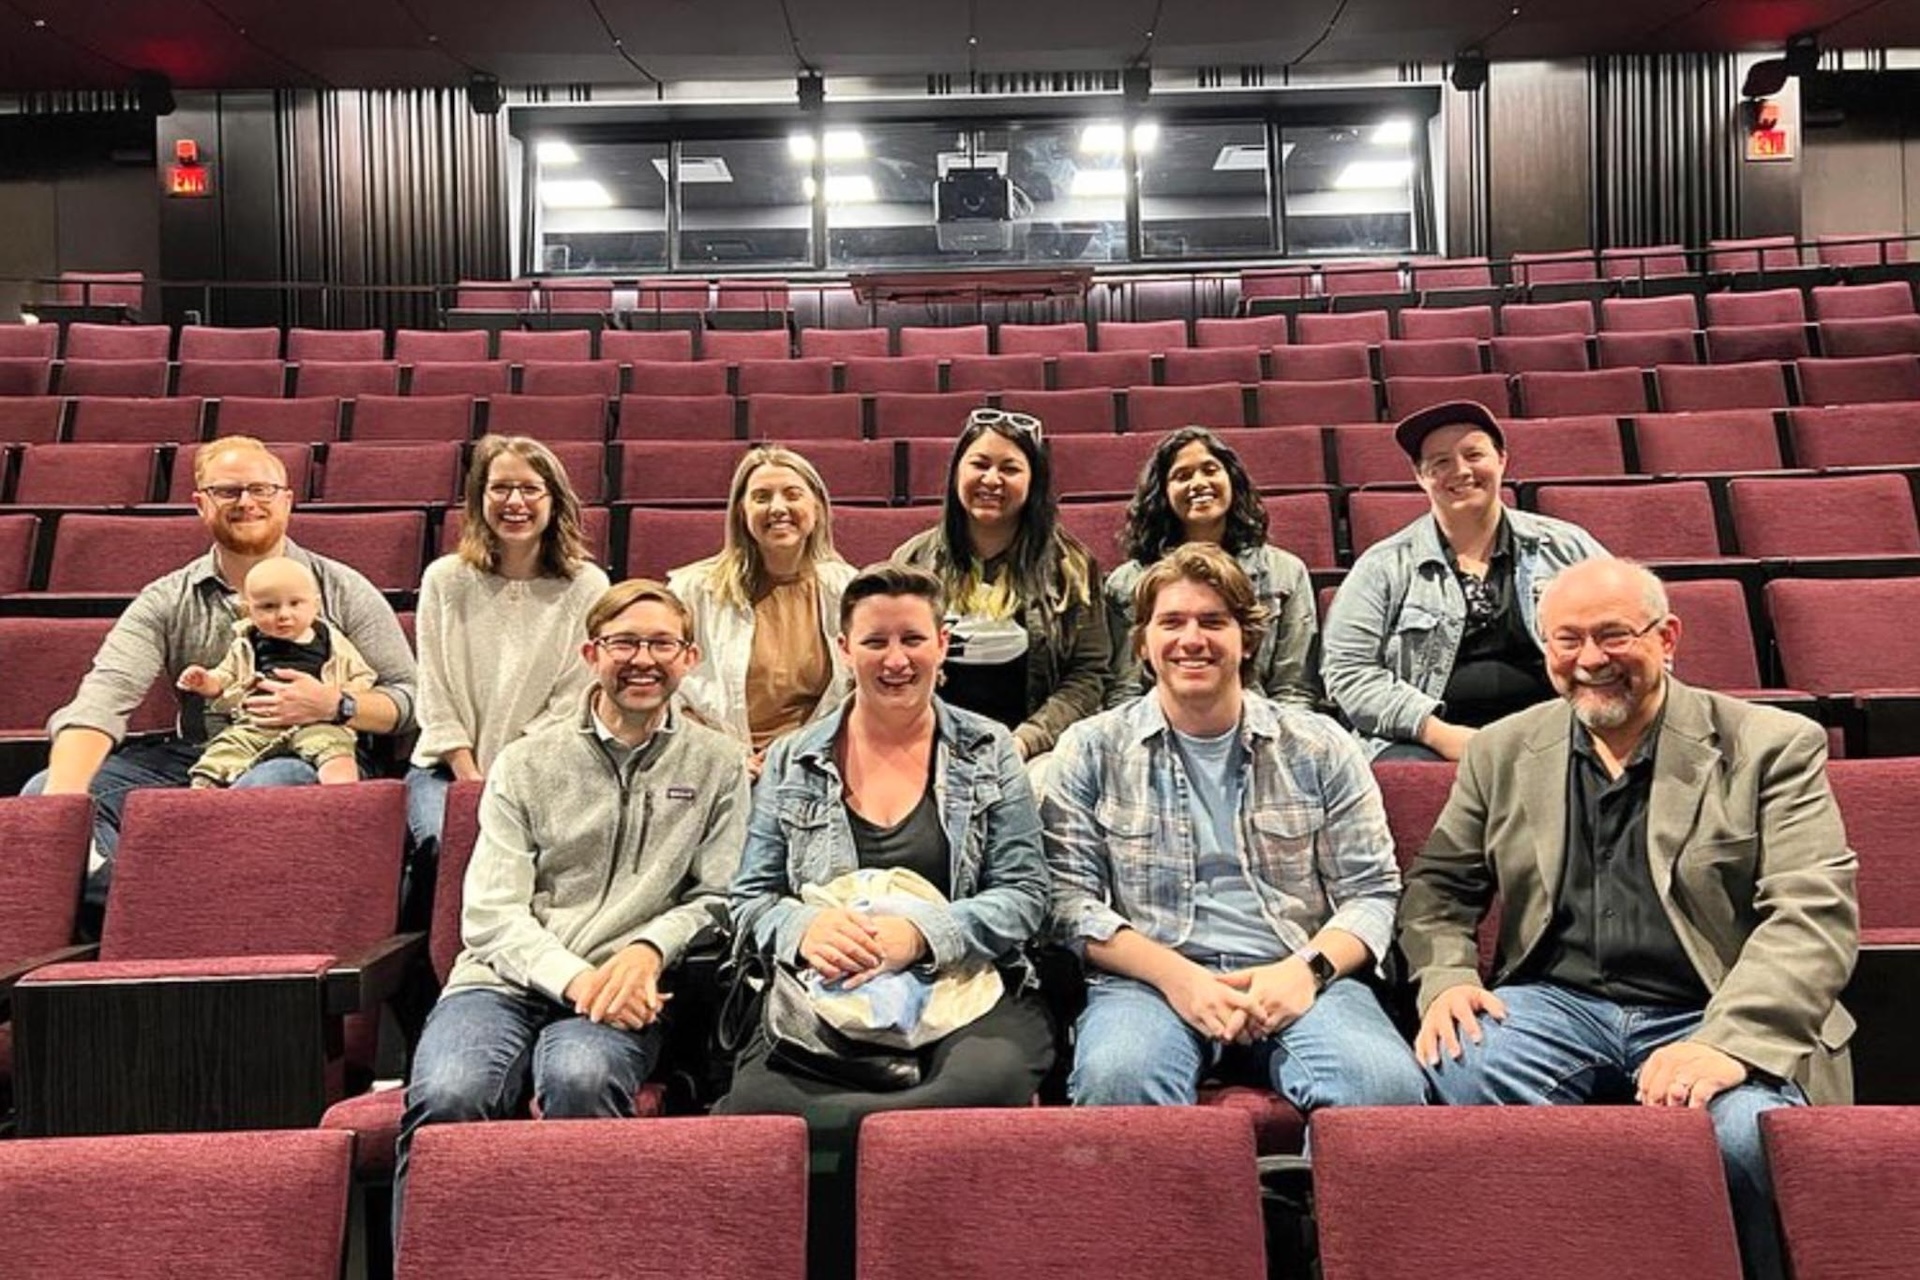 Production & Design Studio alumni sitting in the audience seating inside the Iris Cantor Theater